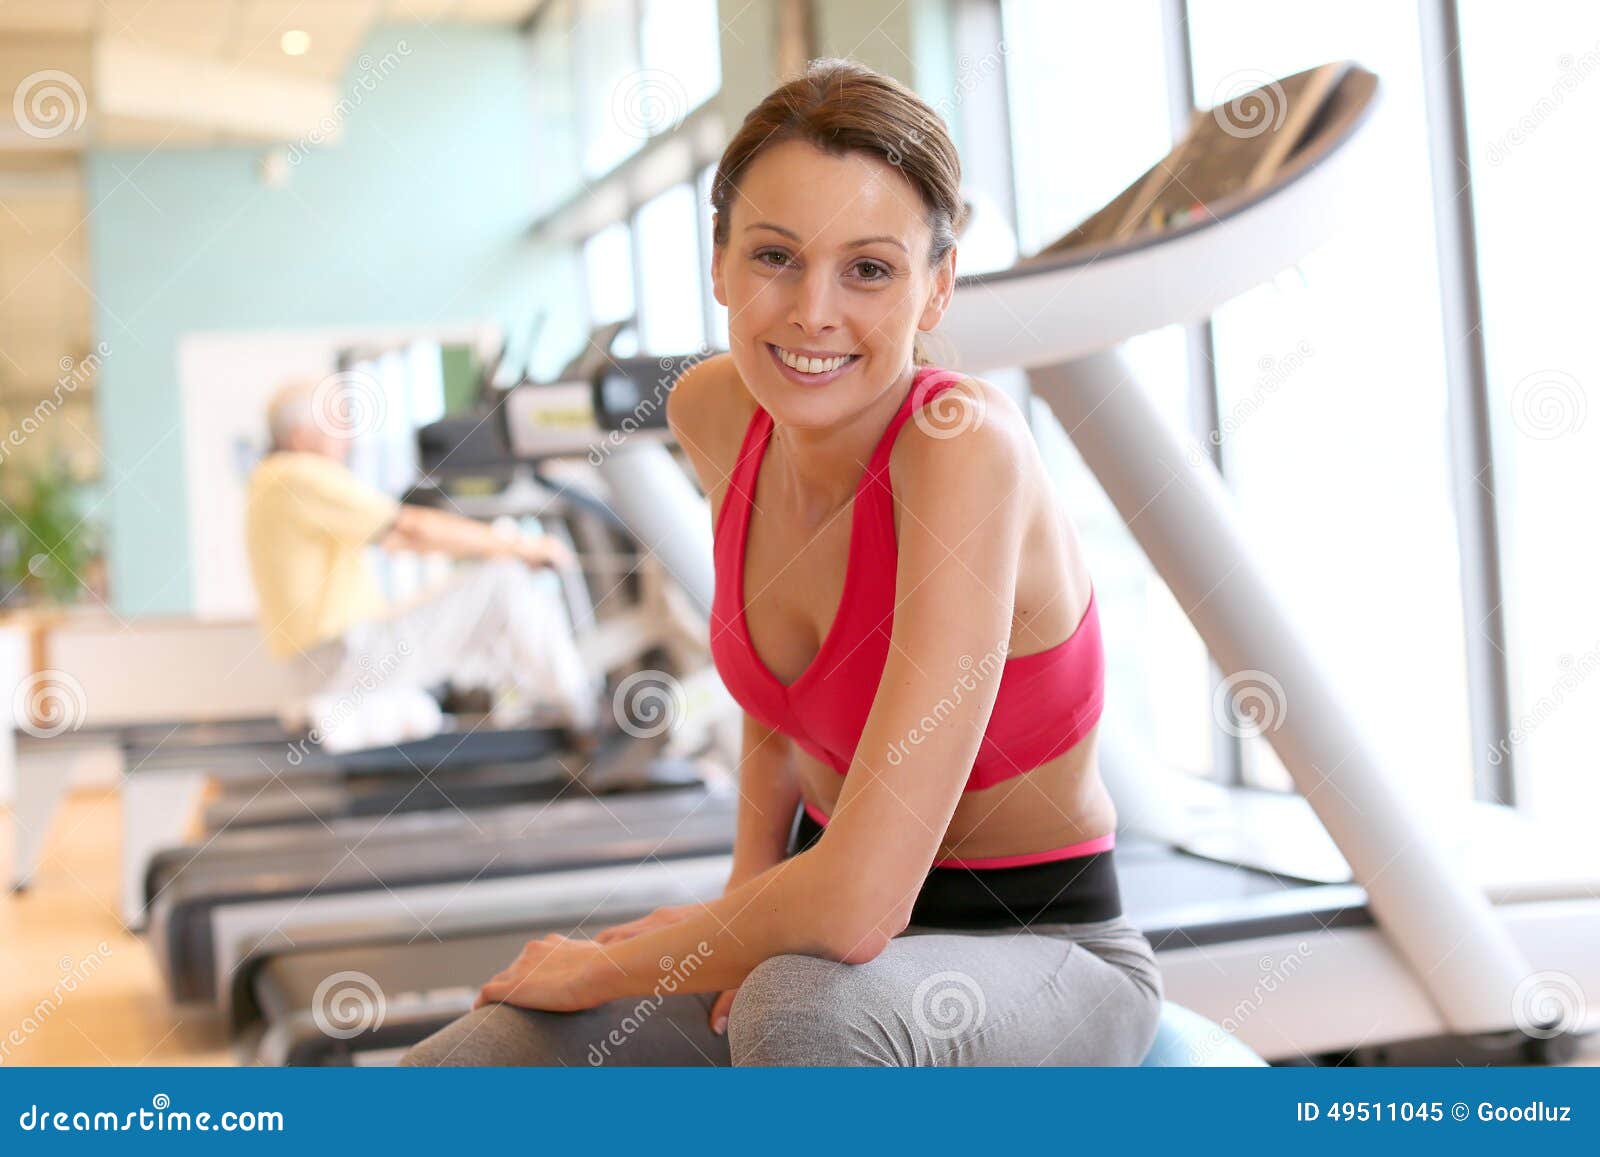 Portrait of Athletic Girl in a Gym Center Stock Image - Image of adult ...